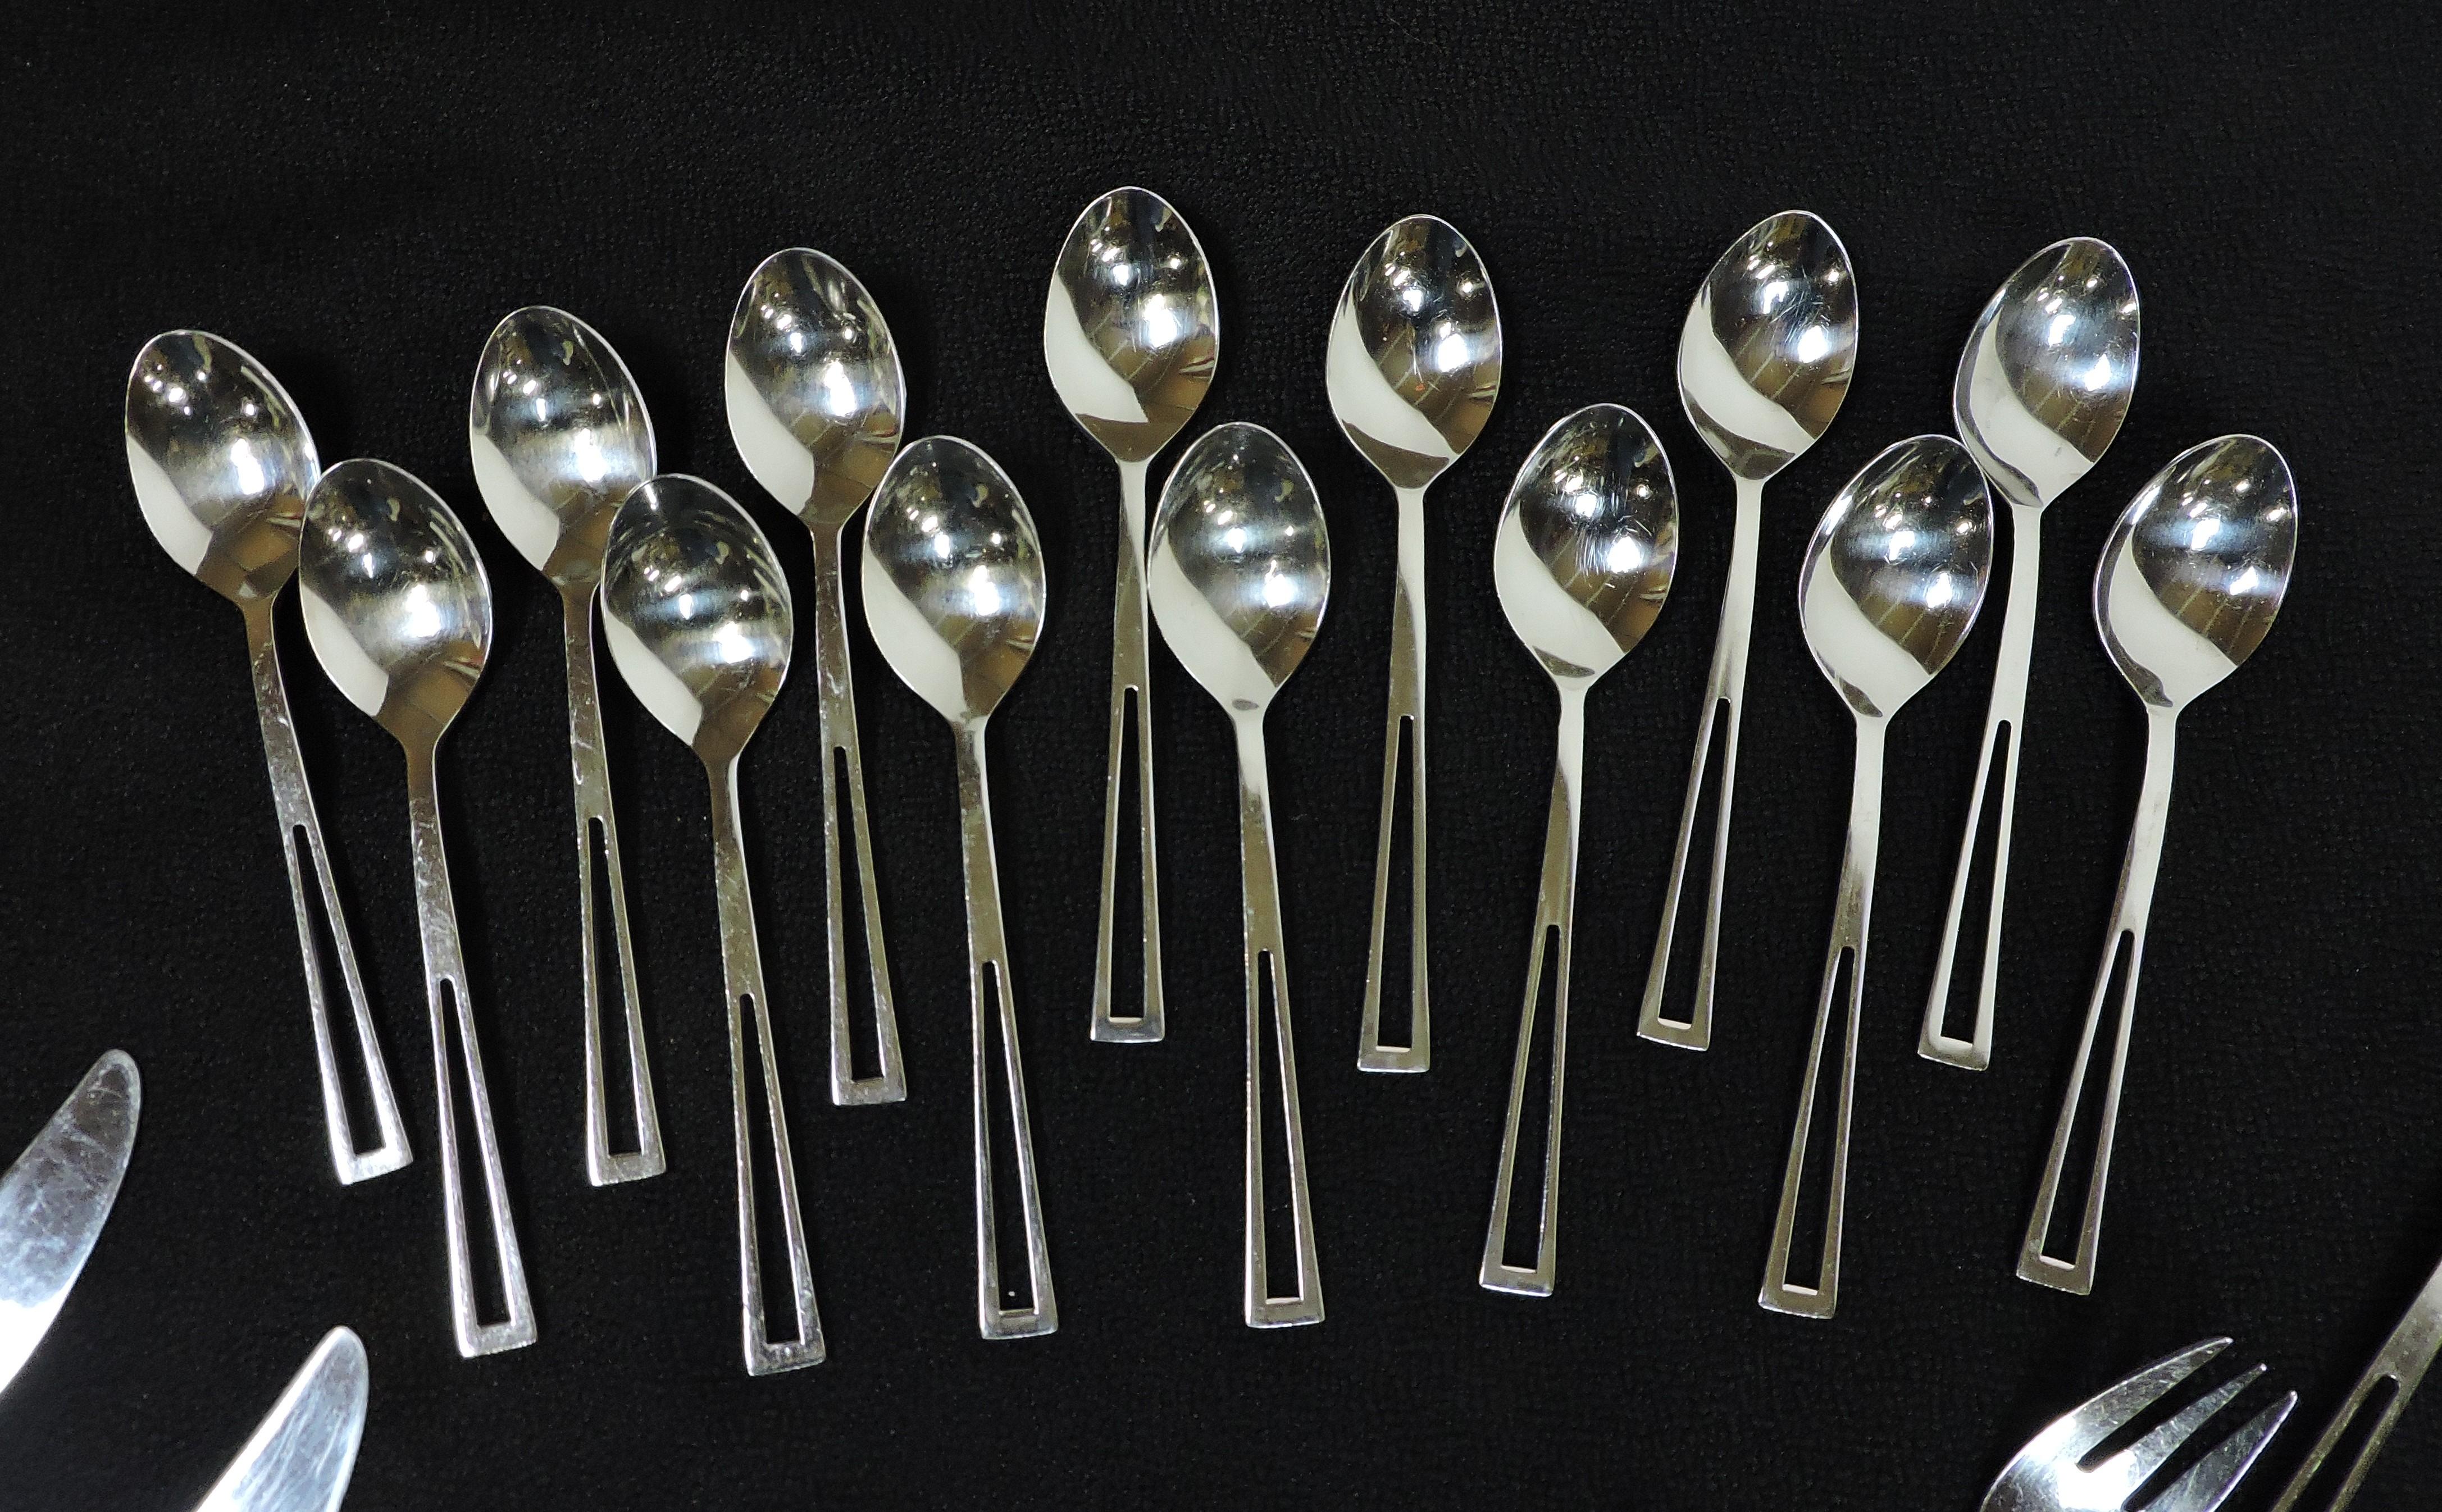 Large set of Towle supreme flatware in the Aperto pattern which was based on the 1955 Celsa of Mexico Avanti pattern. This set has a great modernist look and consists of service for twelve, 60 pieces total - 12 forks, 12 salad forks, 12 soup spoons,